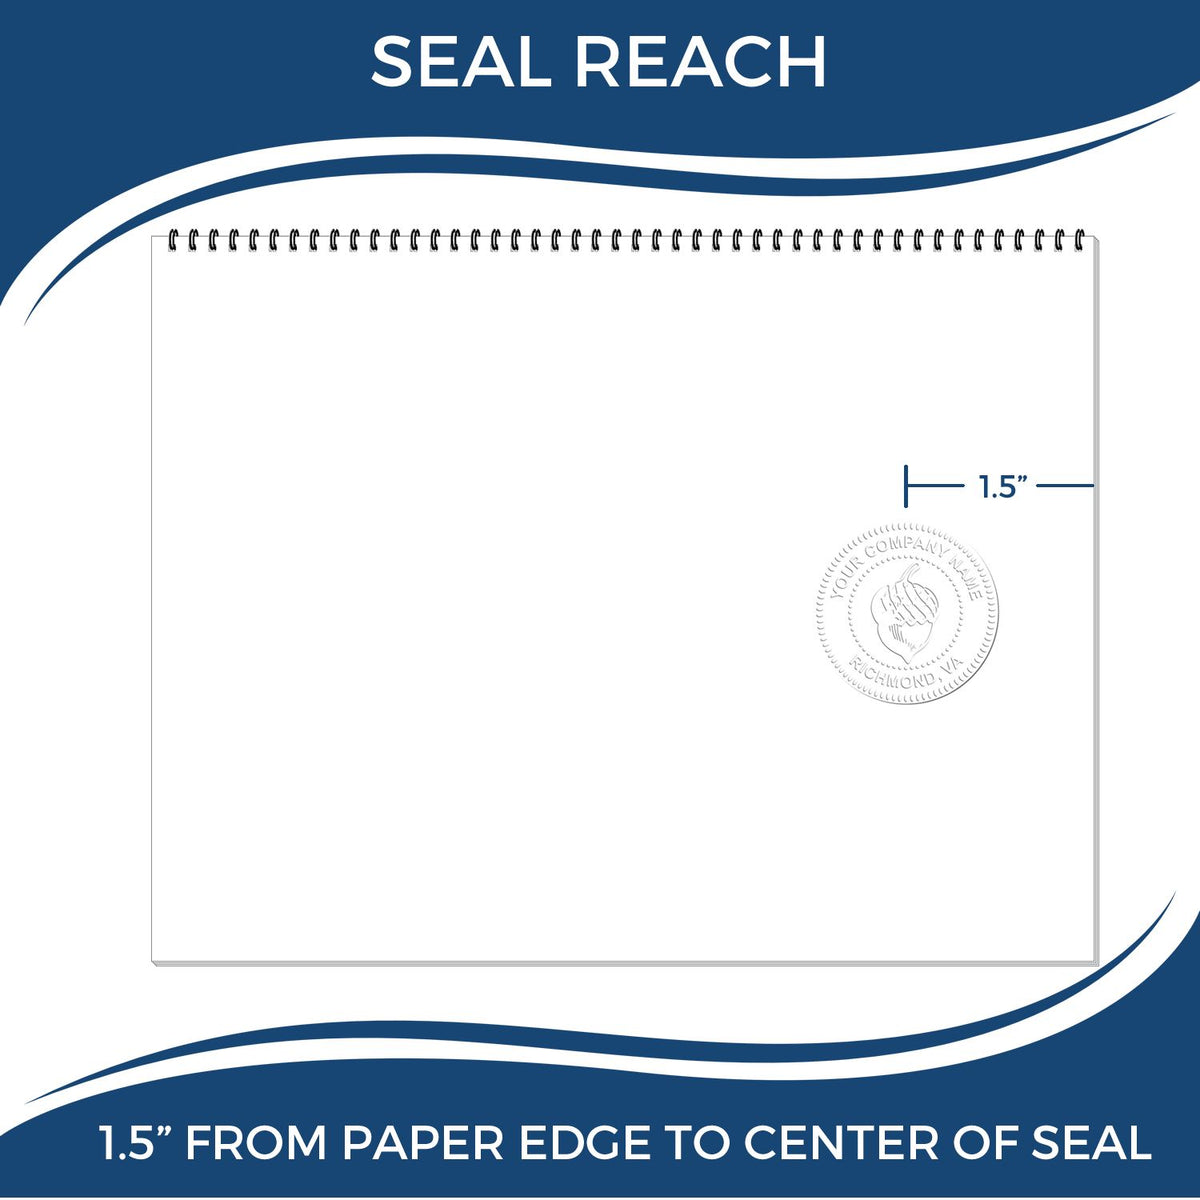 An infographic showing the seal reach which is represented by a ruler and a miniature seal image of the Gift New Hampshire Land Surveyor Seal